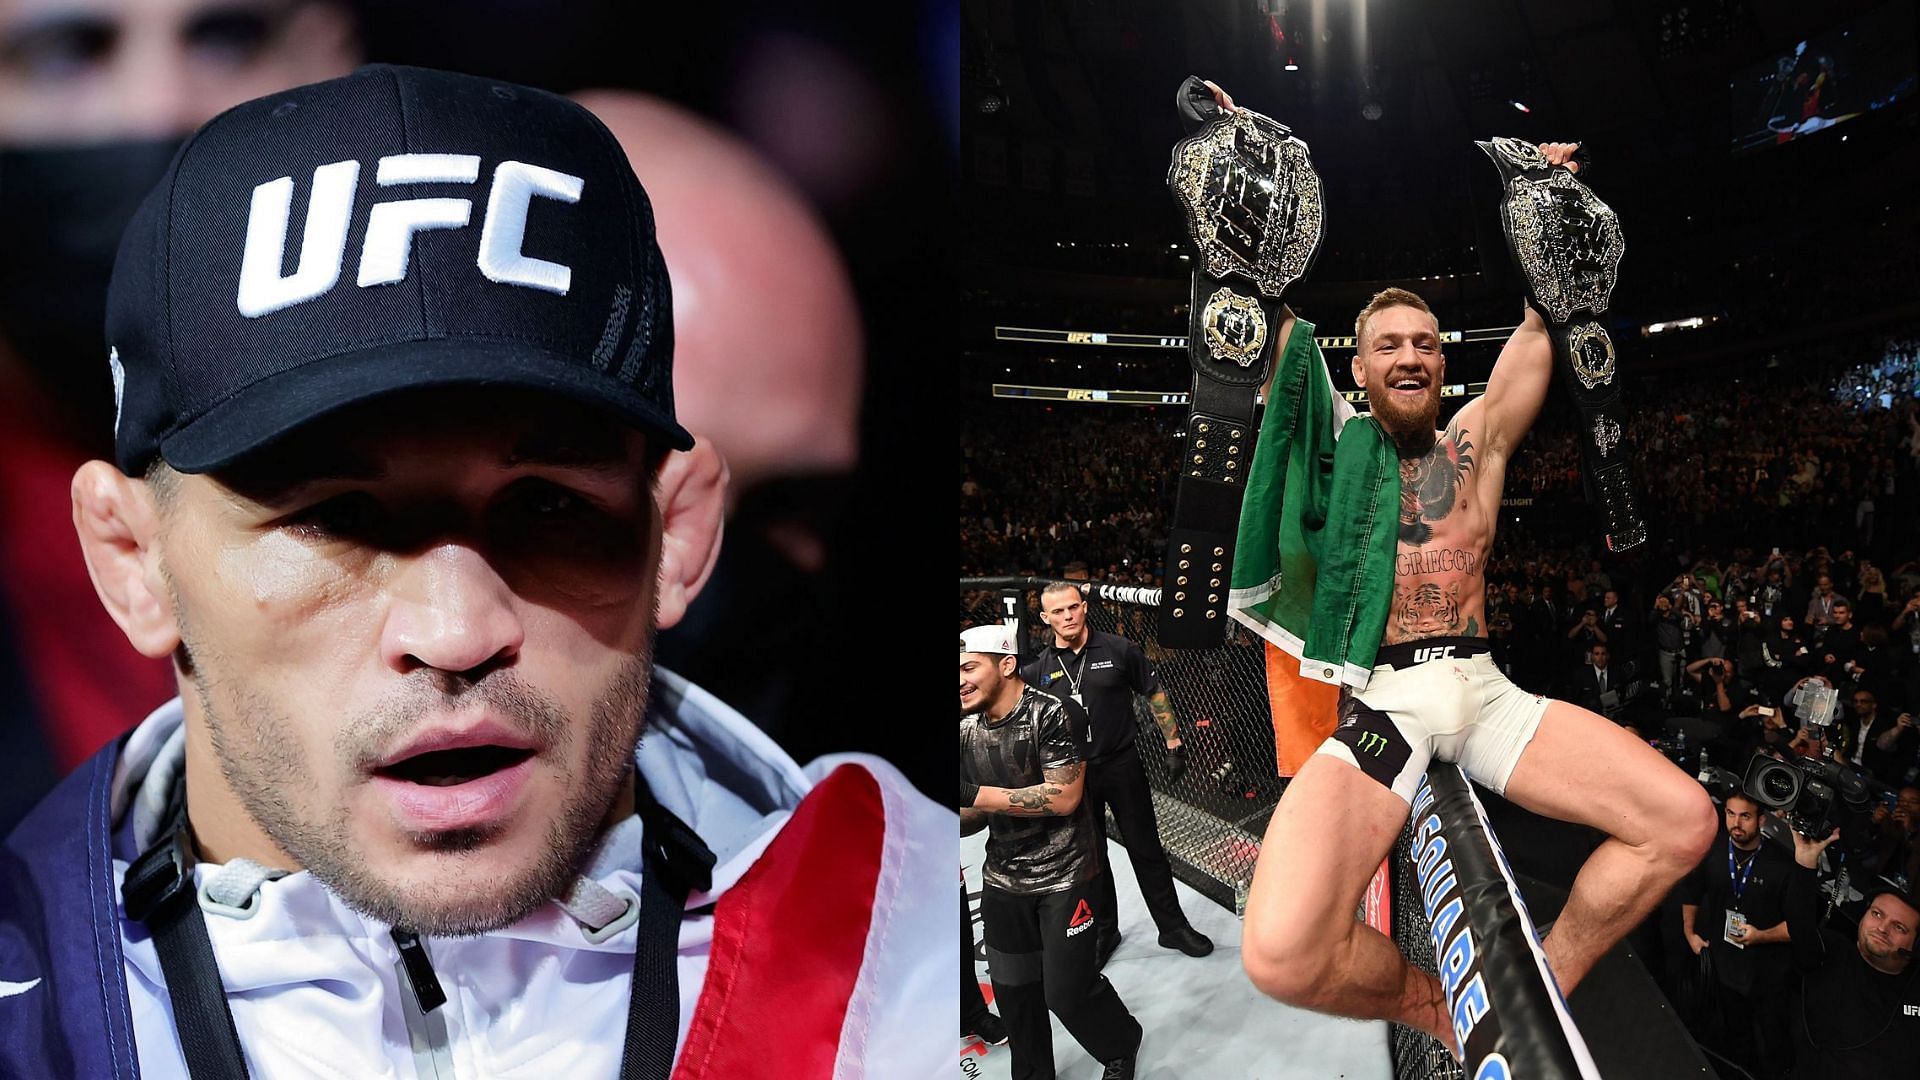 Michael Chandler (Left) and Conor McGregor (Right) (Images courtesy of Getty and ufc.com)